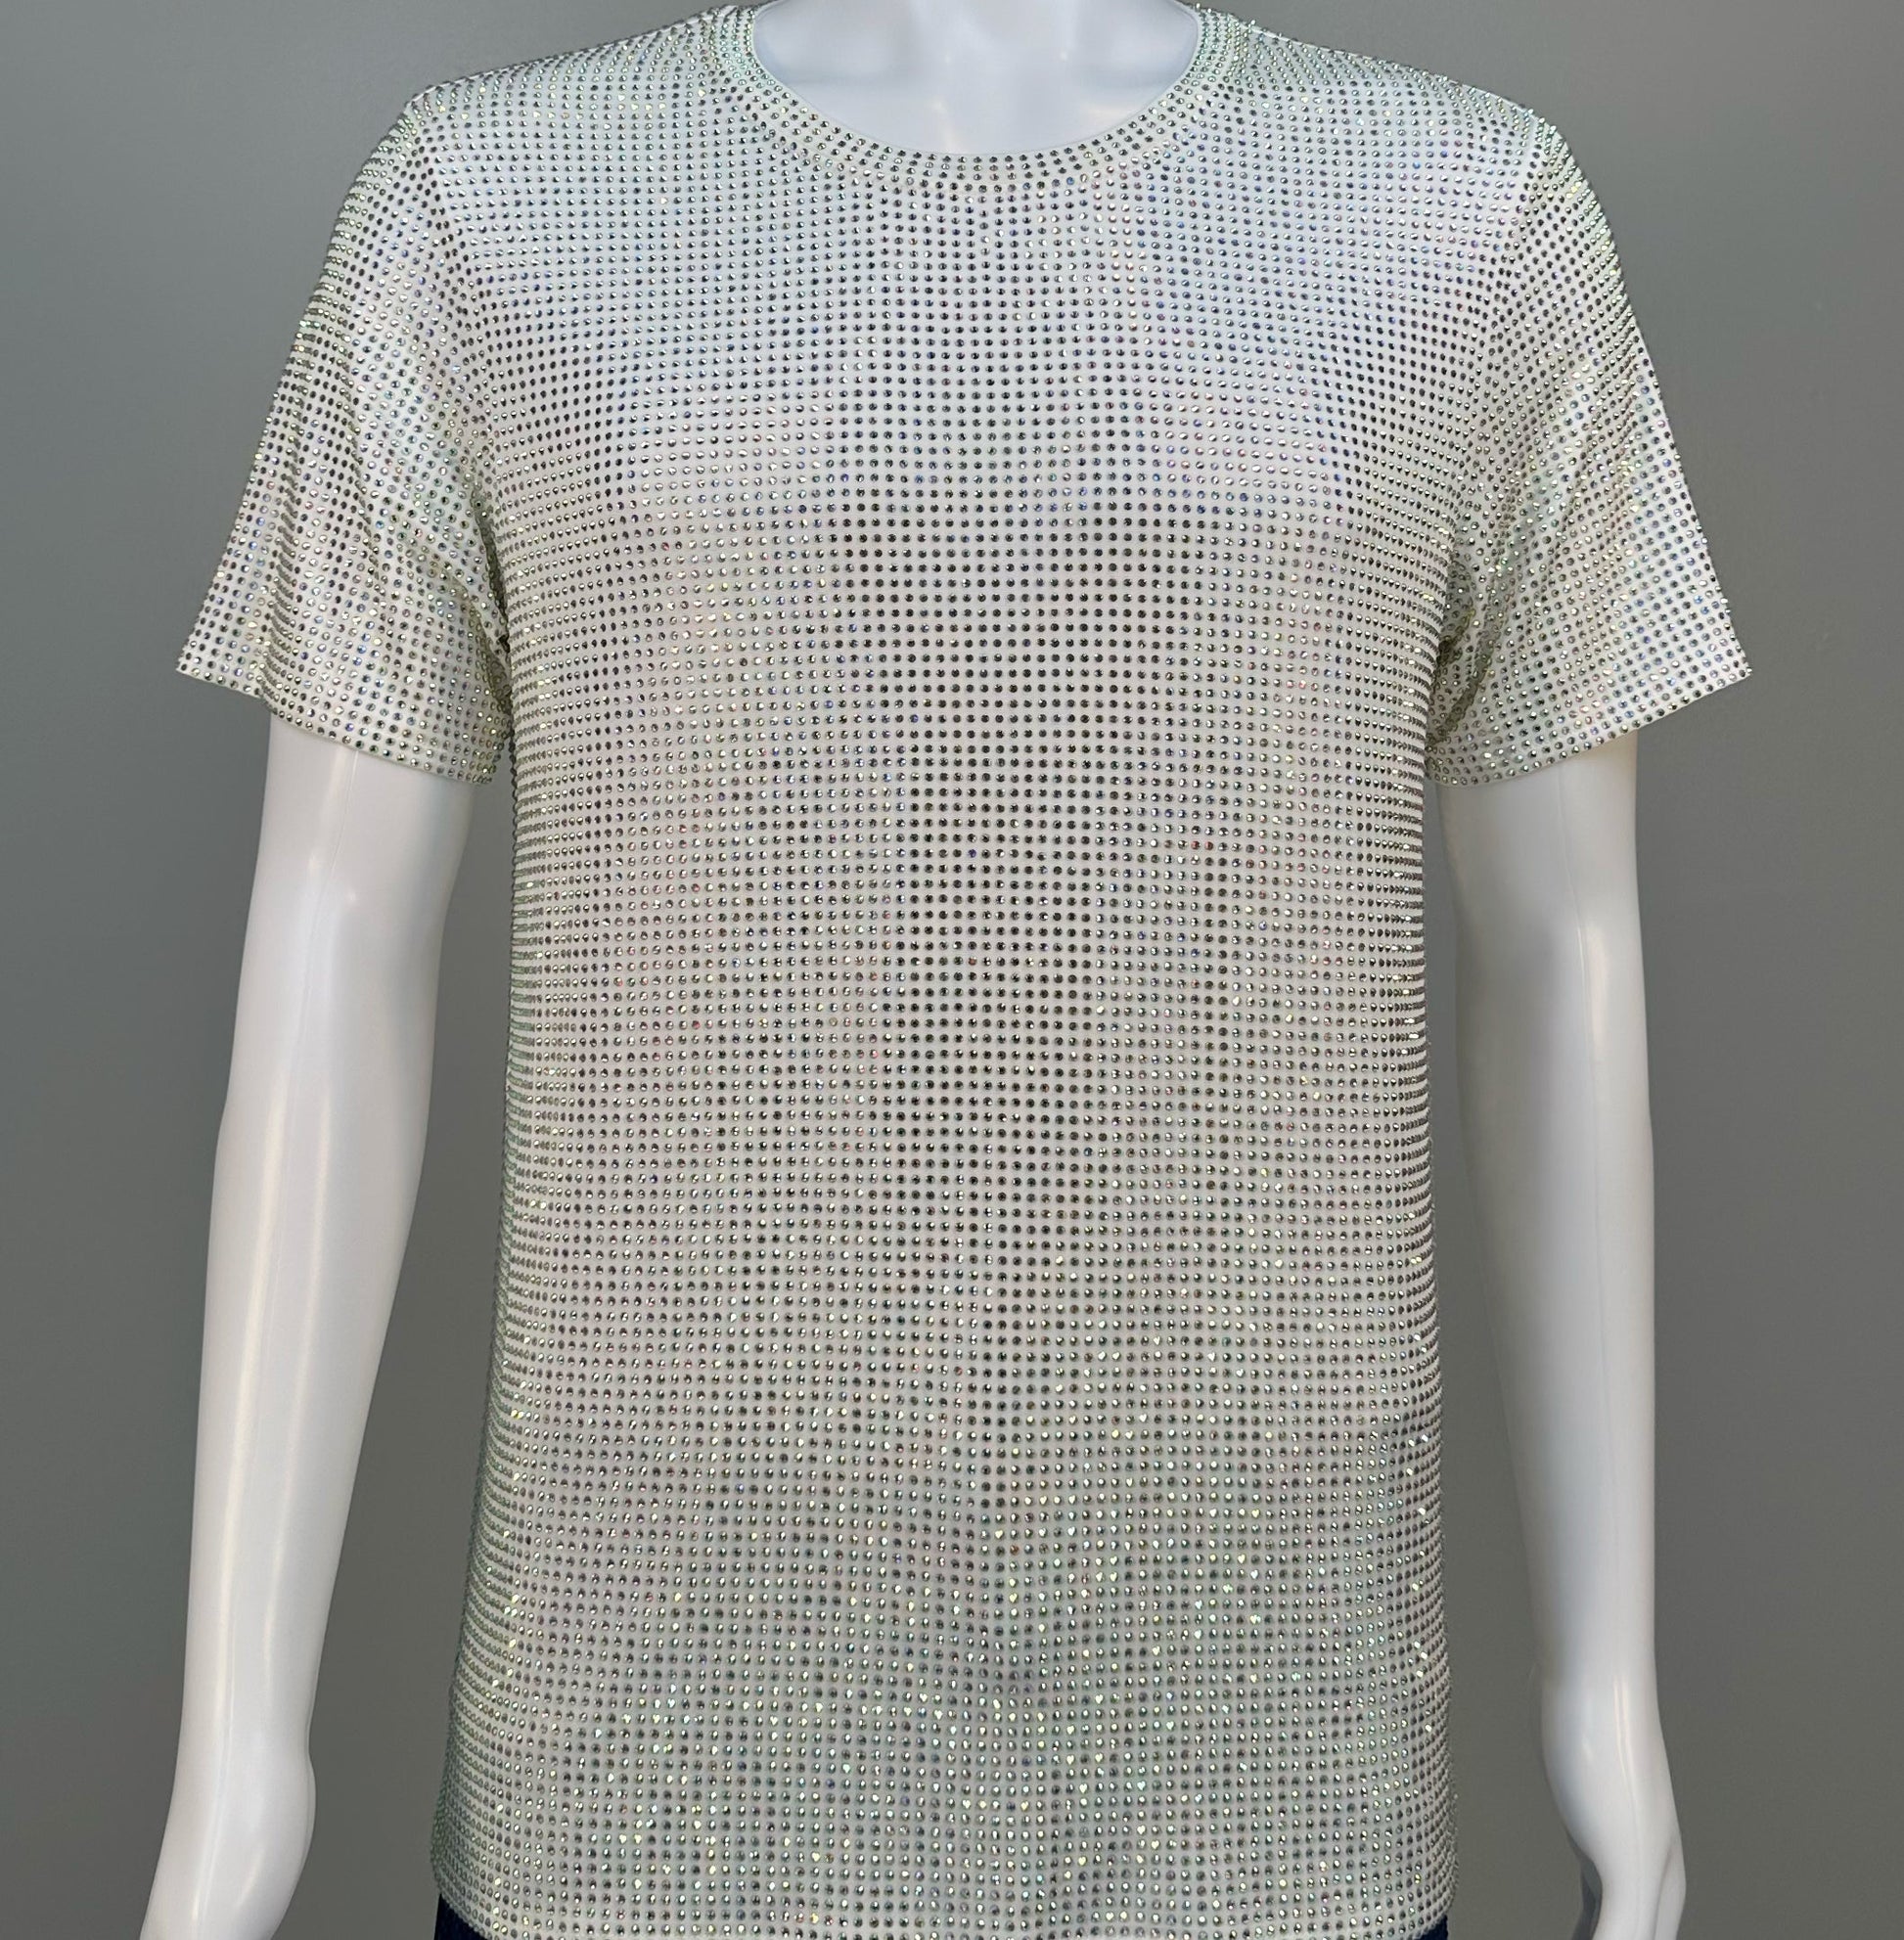 Photo of a sparkling Clear AB Crystals on White Fabric T-shirt featuring thousands of crystal rhinestones.